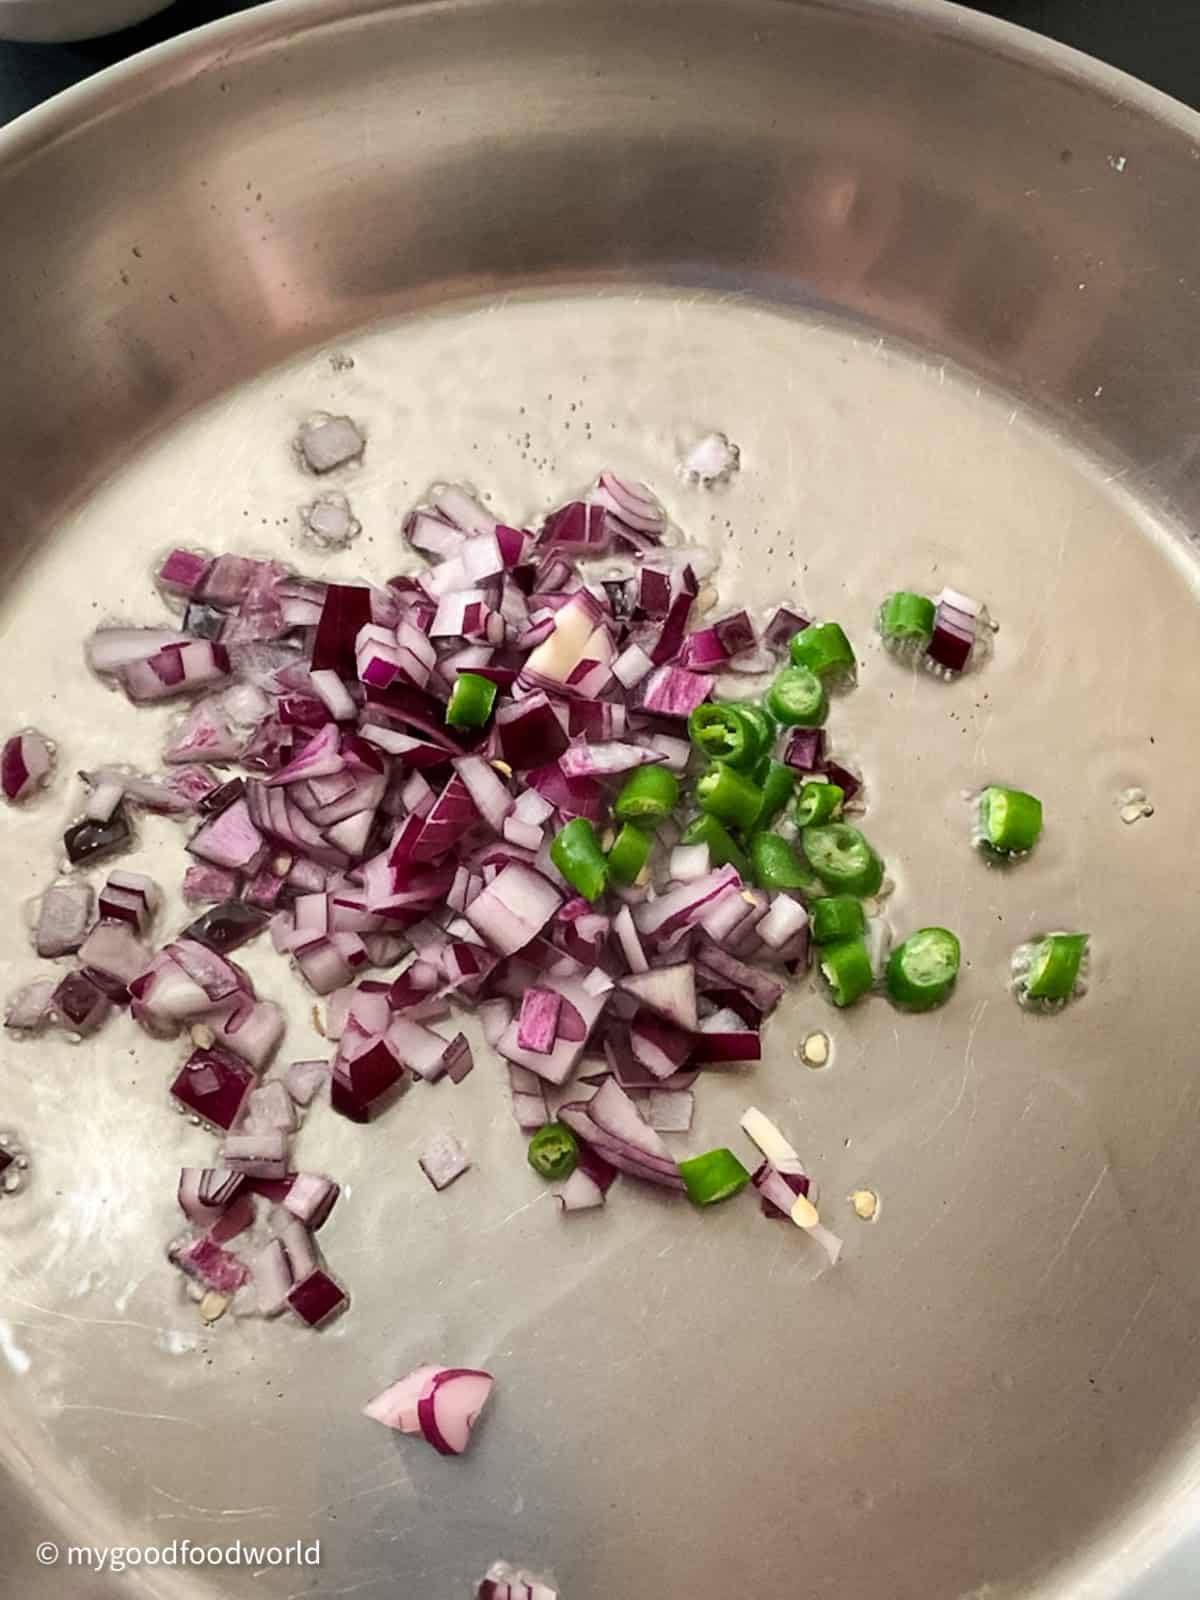 Red onions and green chili peppers frying in a pan on a stovetop.